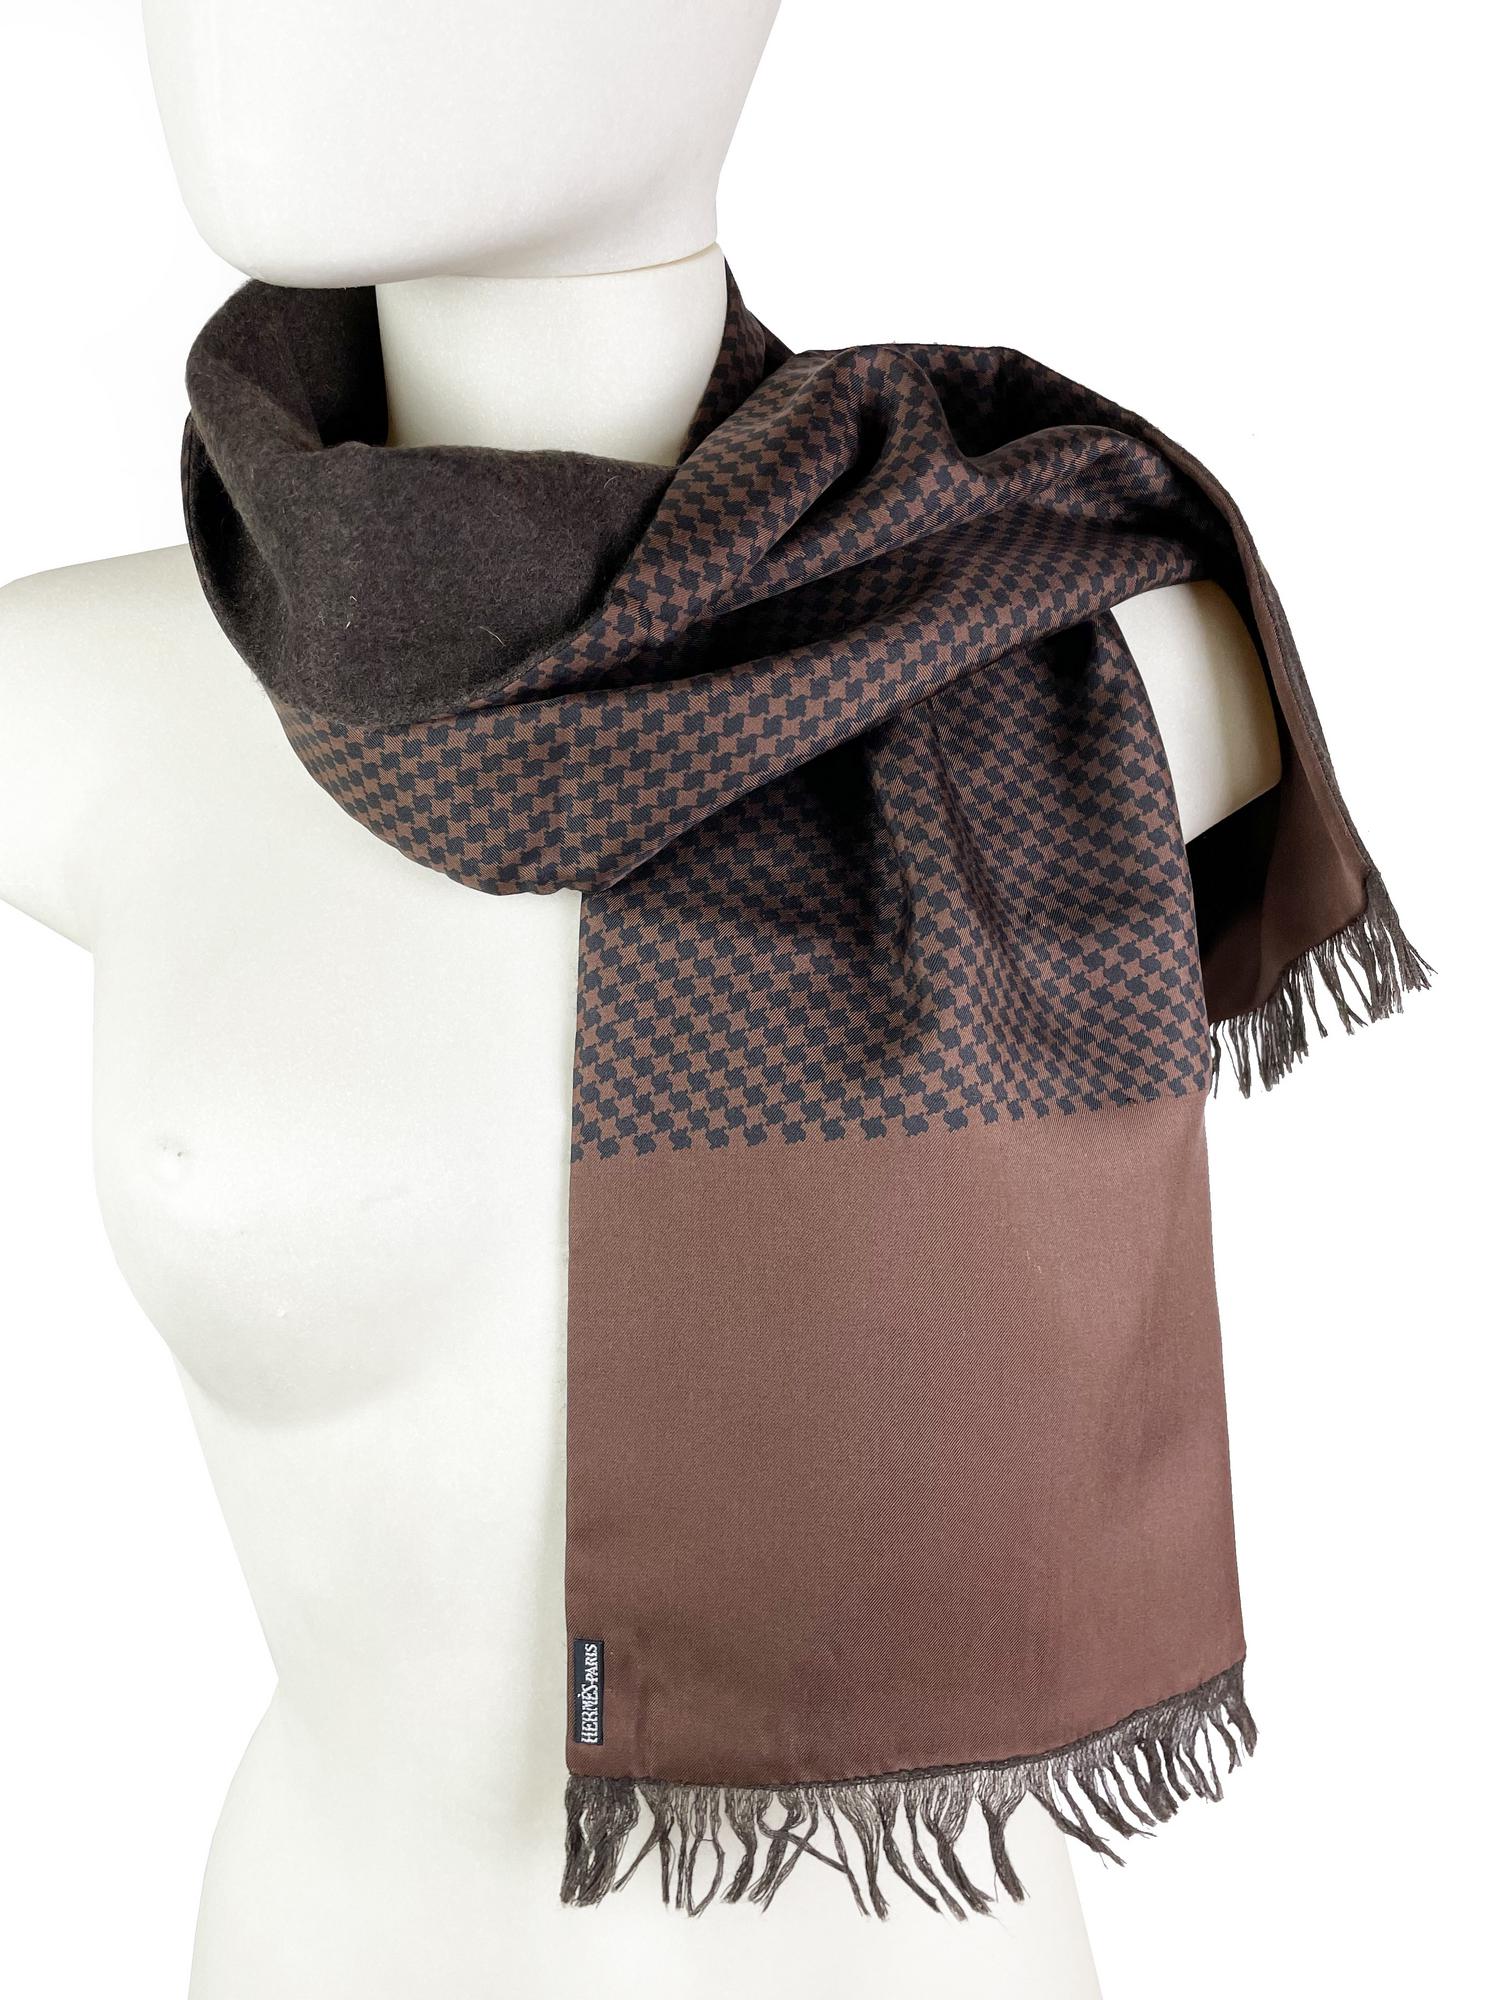 Hermes BLACK AND BROWN SCARF Description: Silk and wool scarf. Length cm 135....